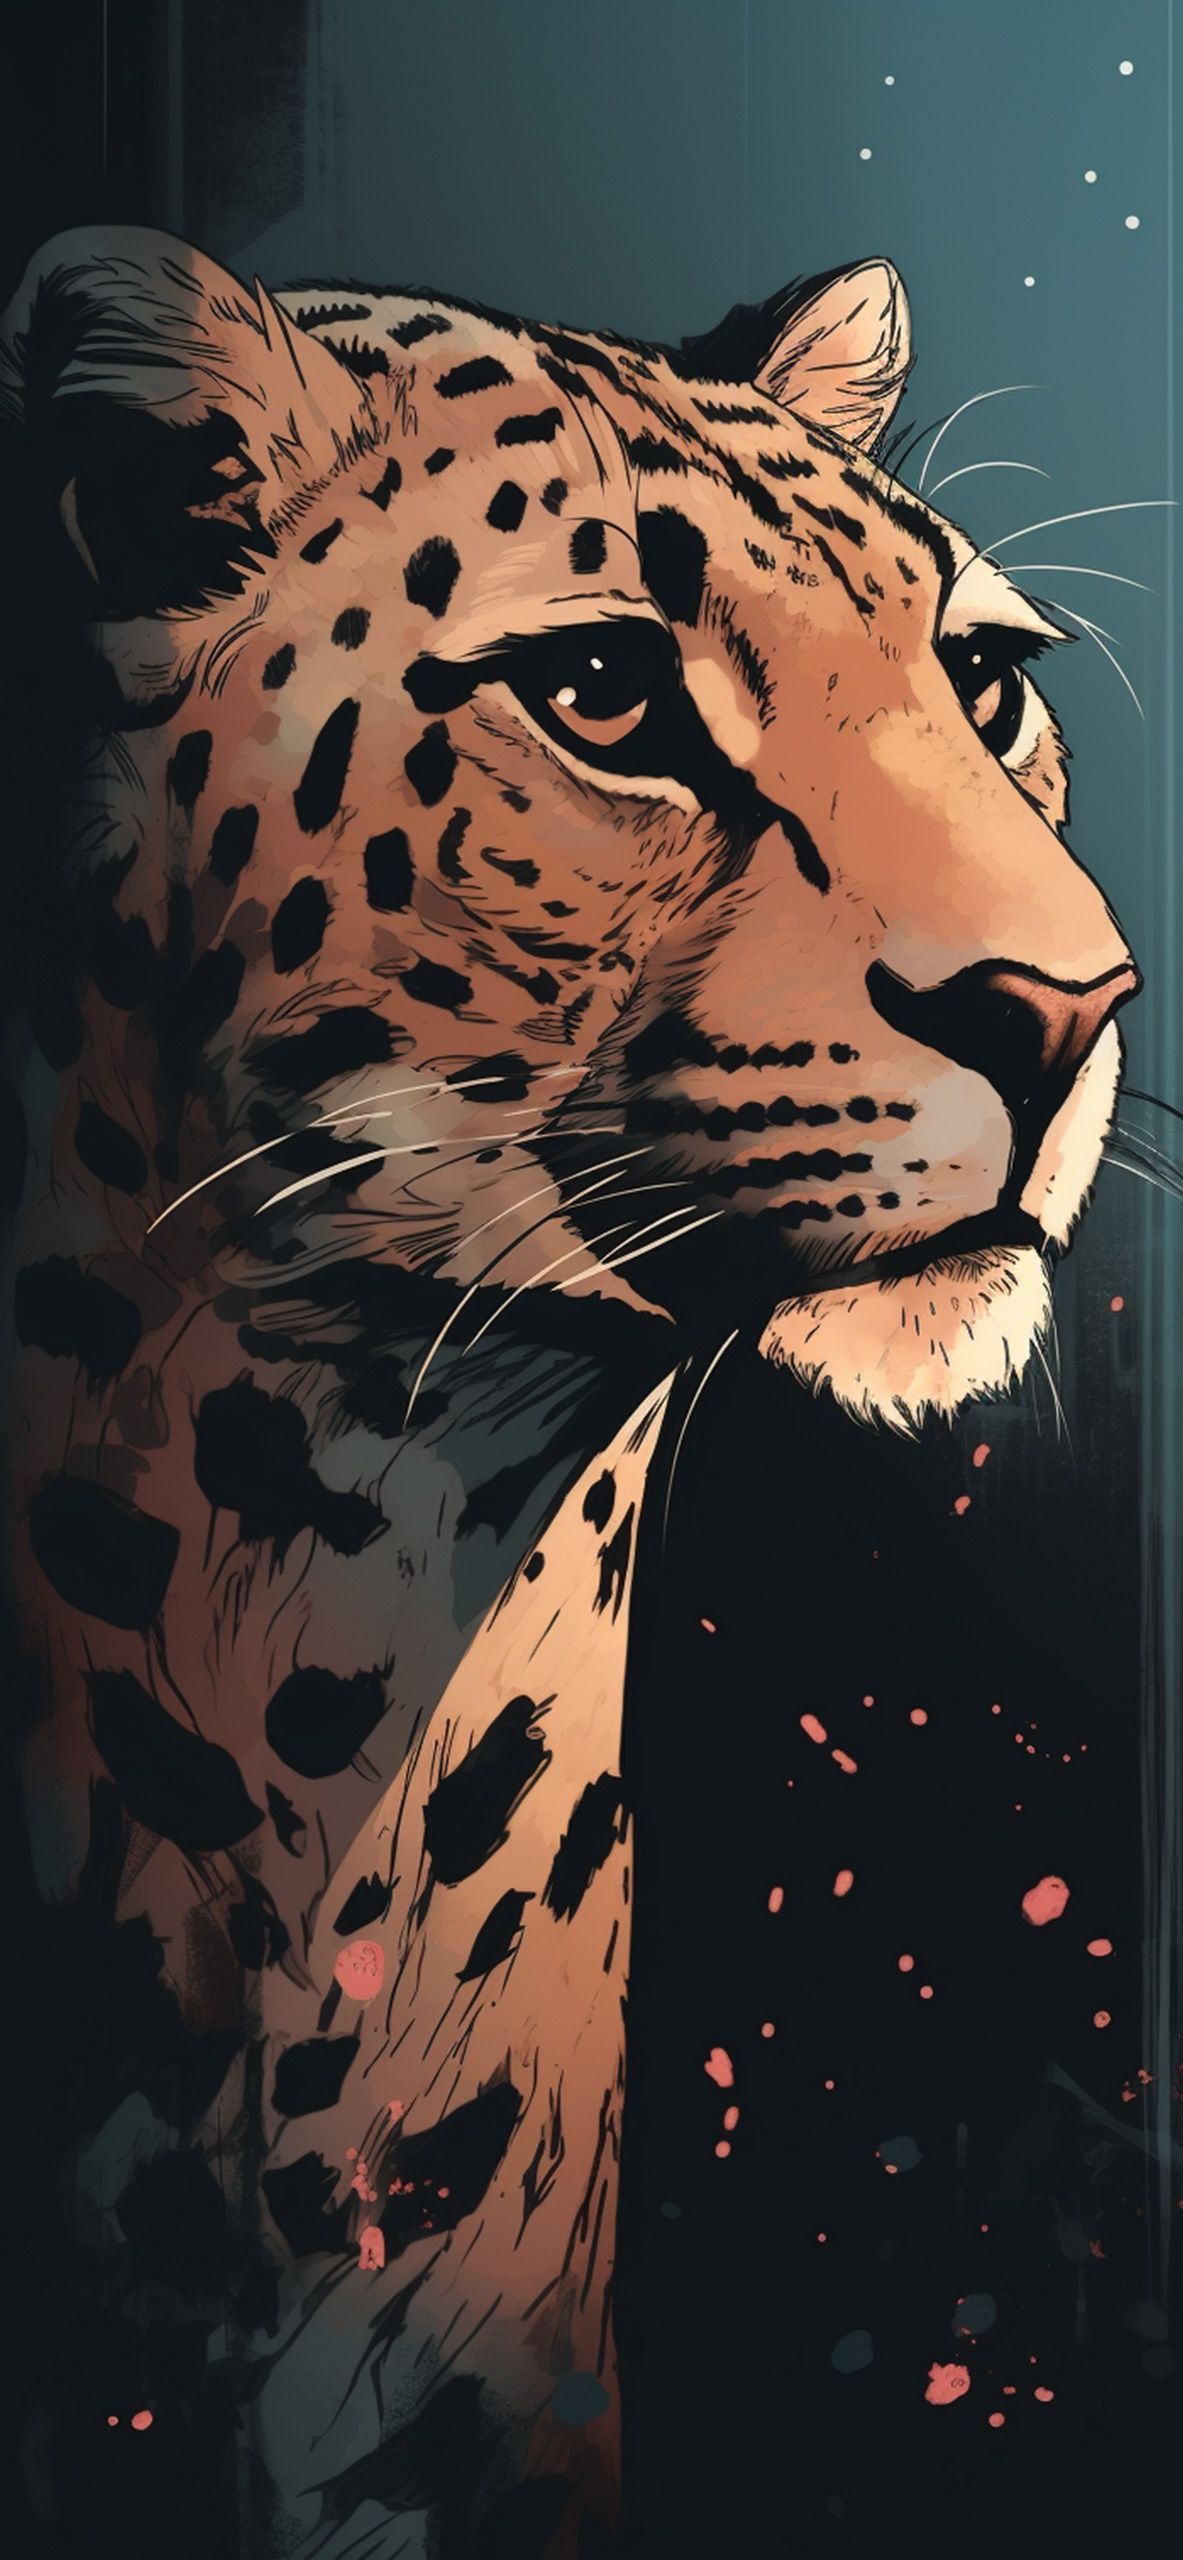 Download this wallpaper for your iPhone X from the following link. - Leopard